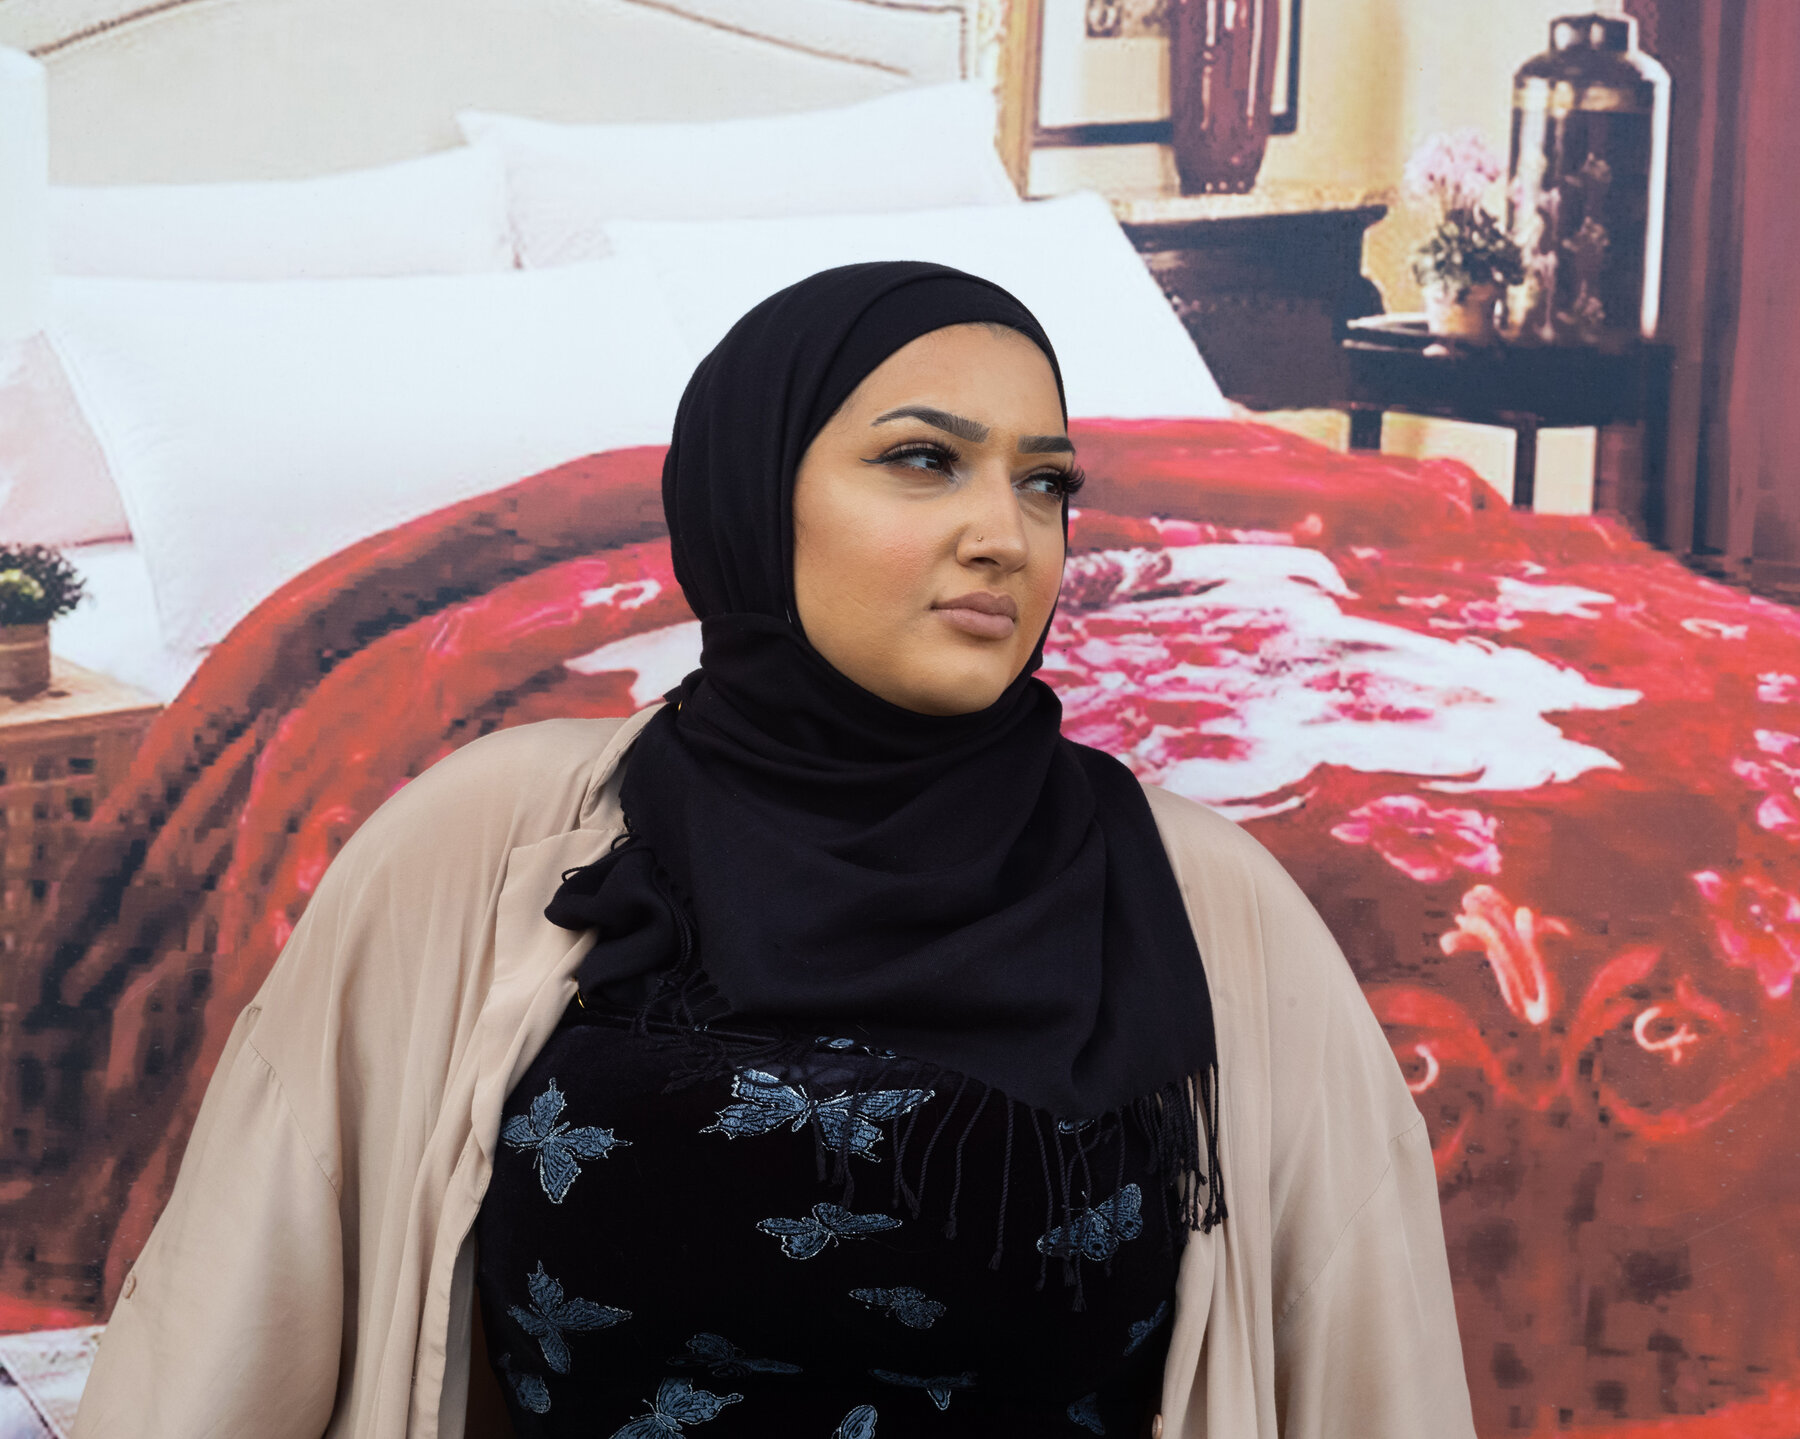 A young woman standing in front of an advertisement depicting a bedroom with a bed covered with a red floral blanket. She wears a black shirt covered in blue butterflies, a tan cardigan sweater and a black headscarf.